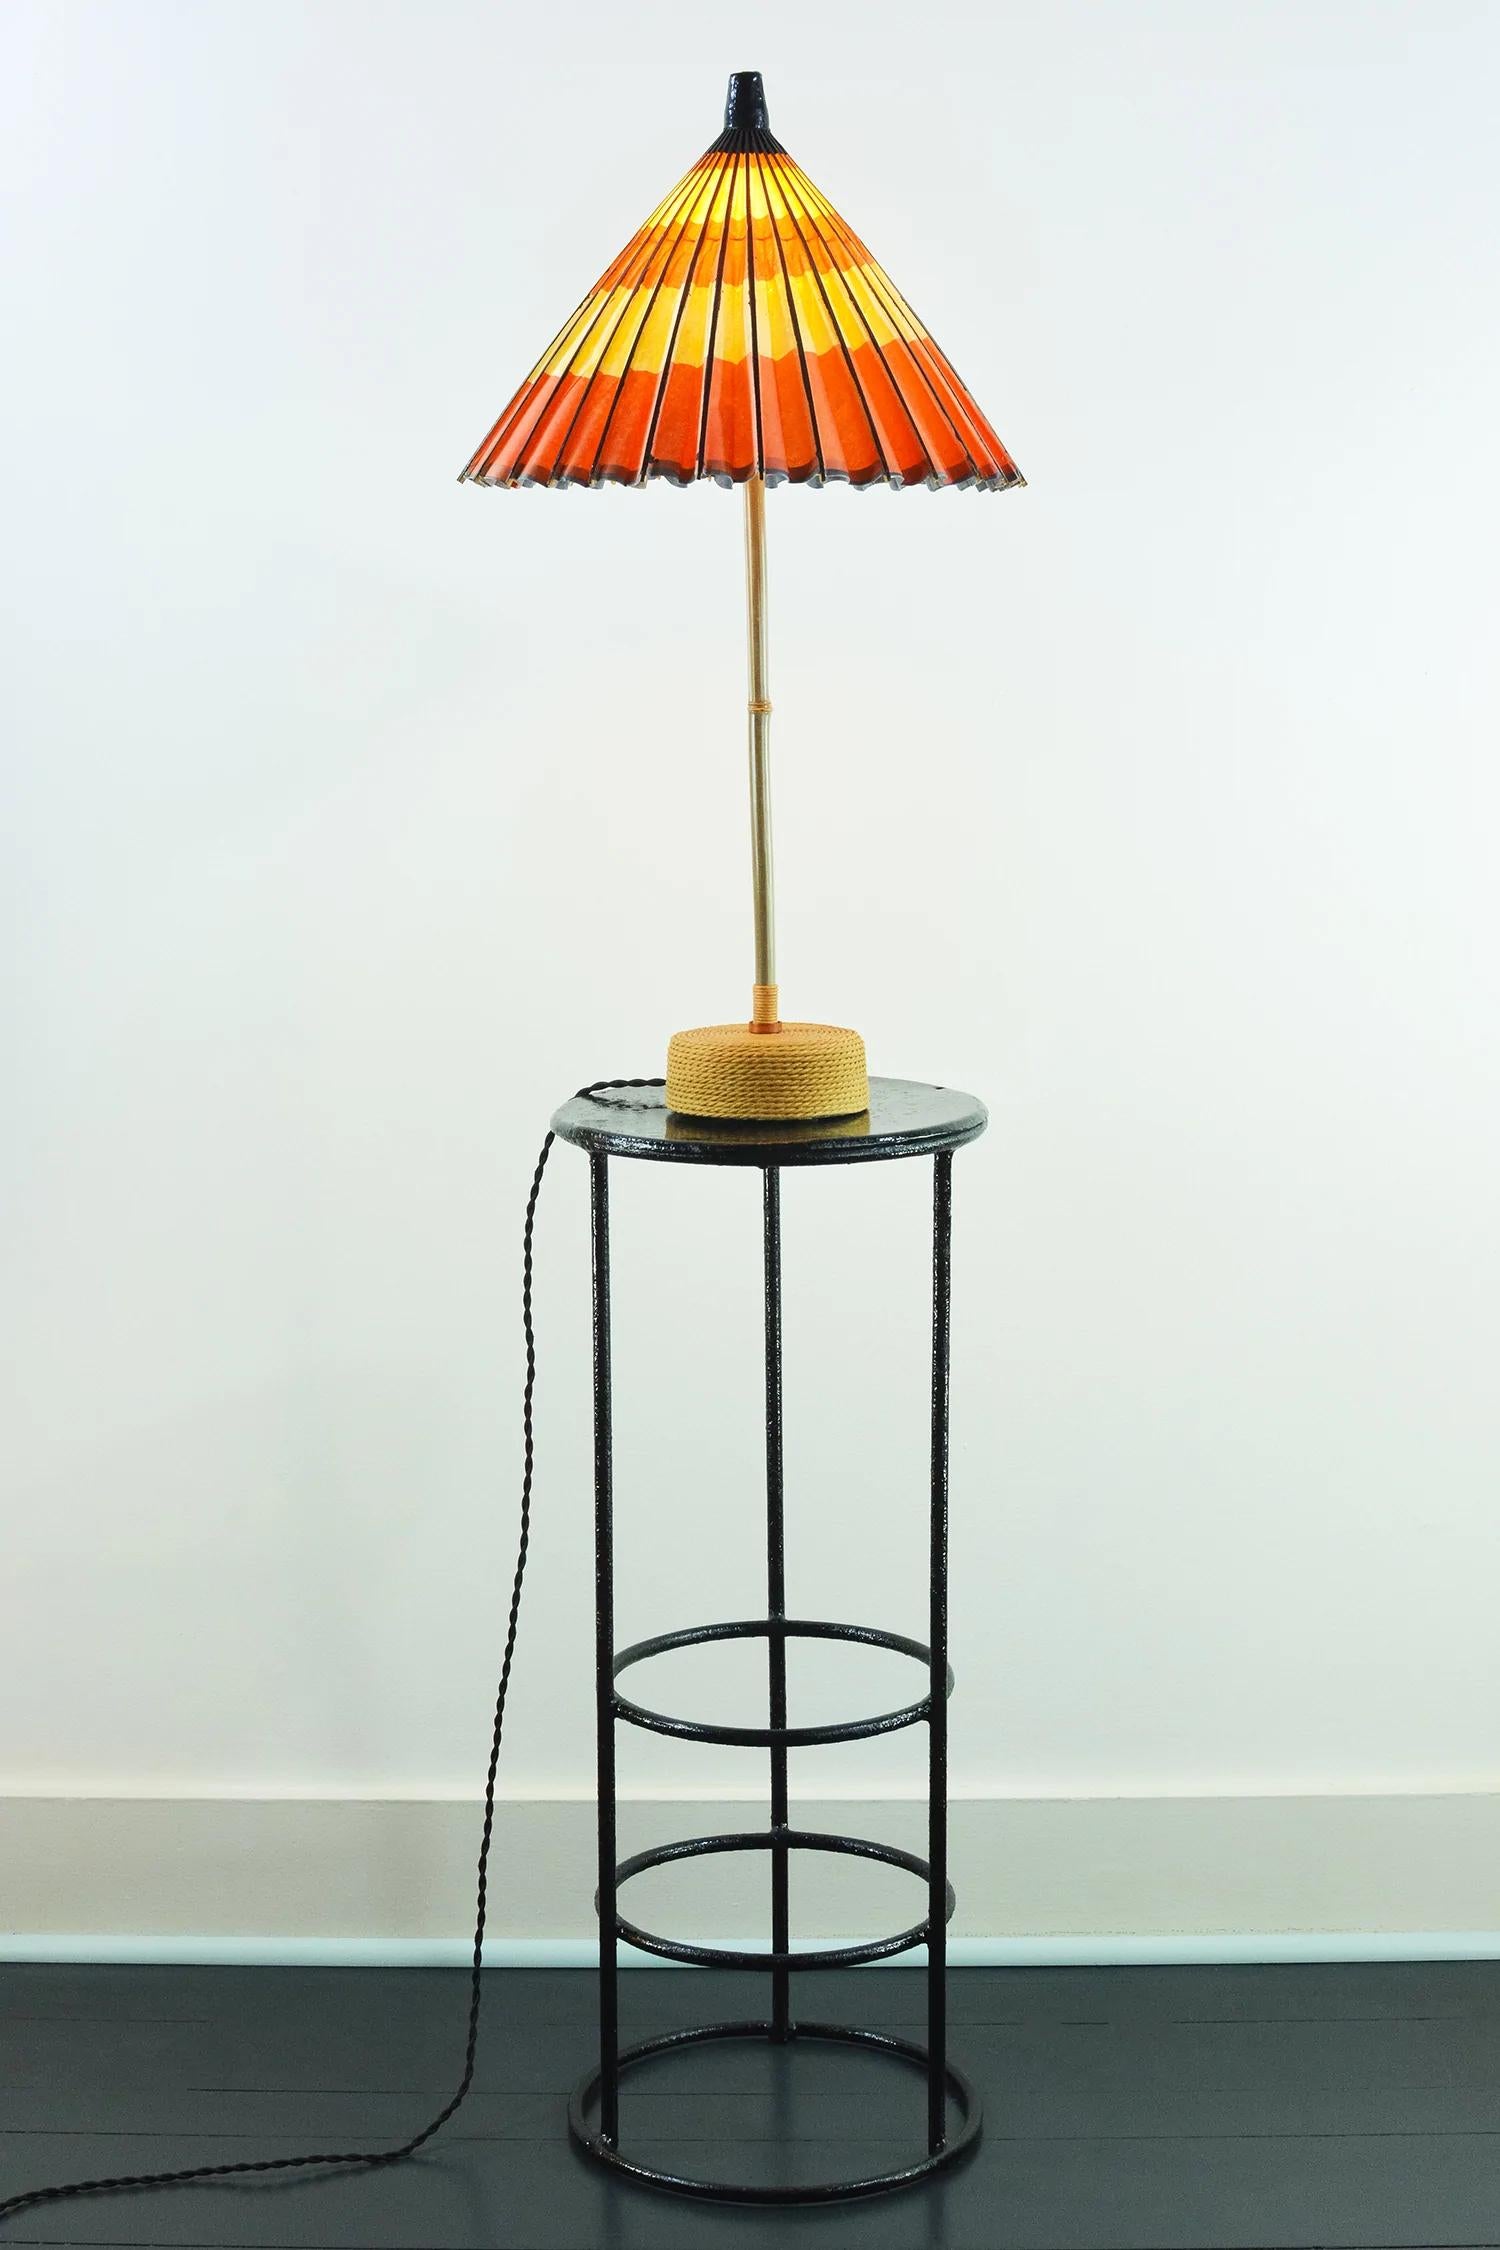 Art Deco 'World's Fair' Bamboo Lamp with Upcycled Parasol Shade by Christopher Tennant